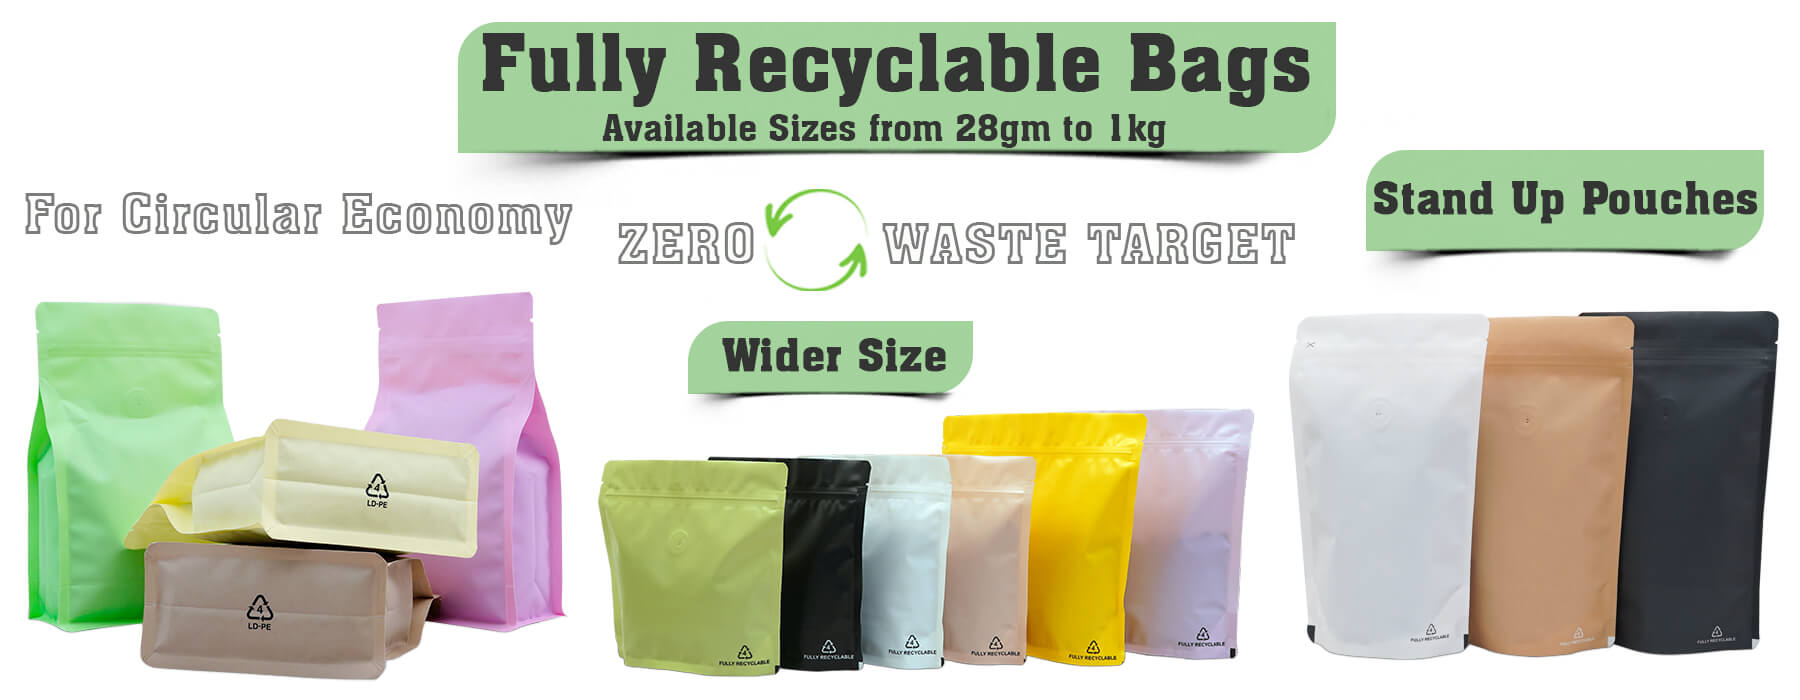 Fully recyclable bags